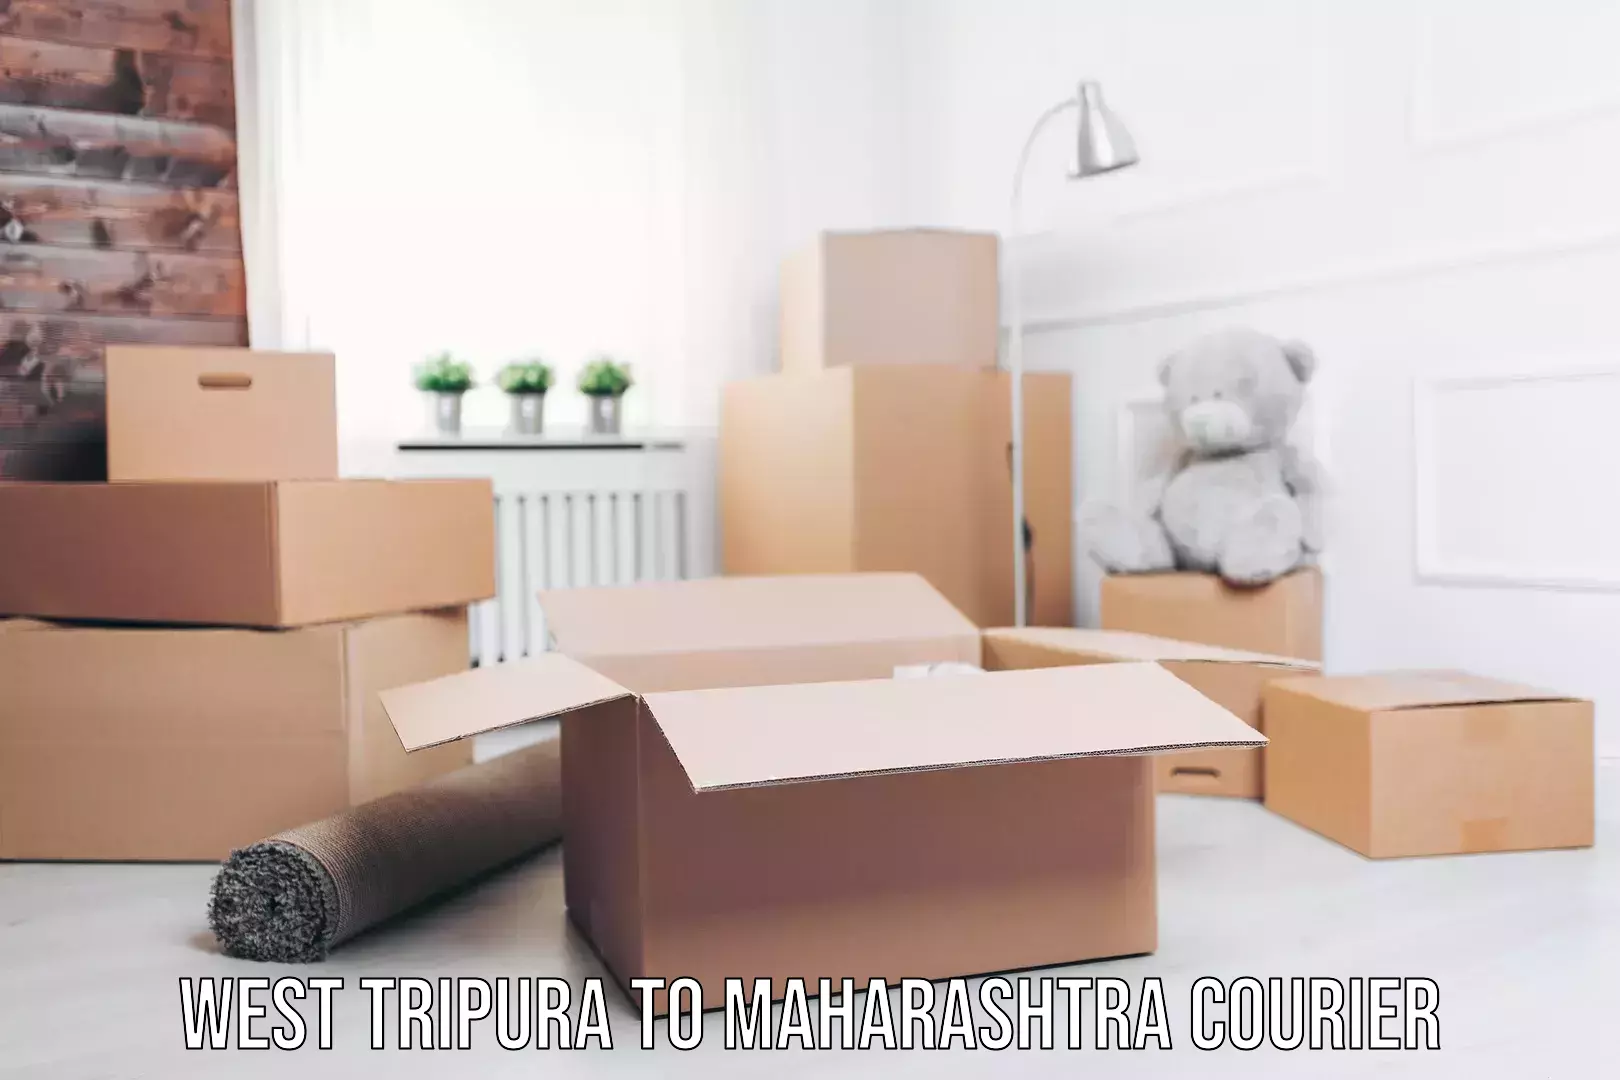 Small business couriers West Tripura to Maharashtra